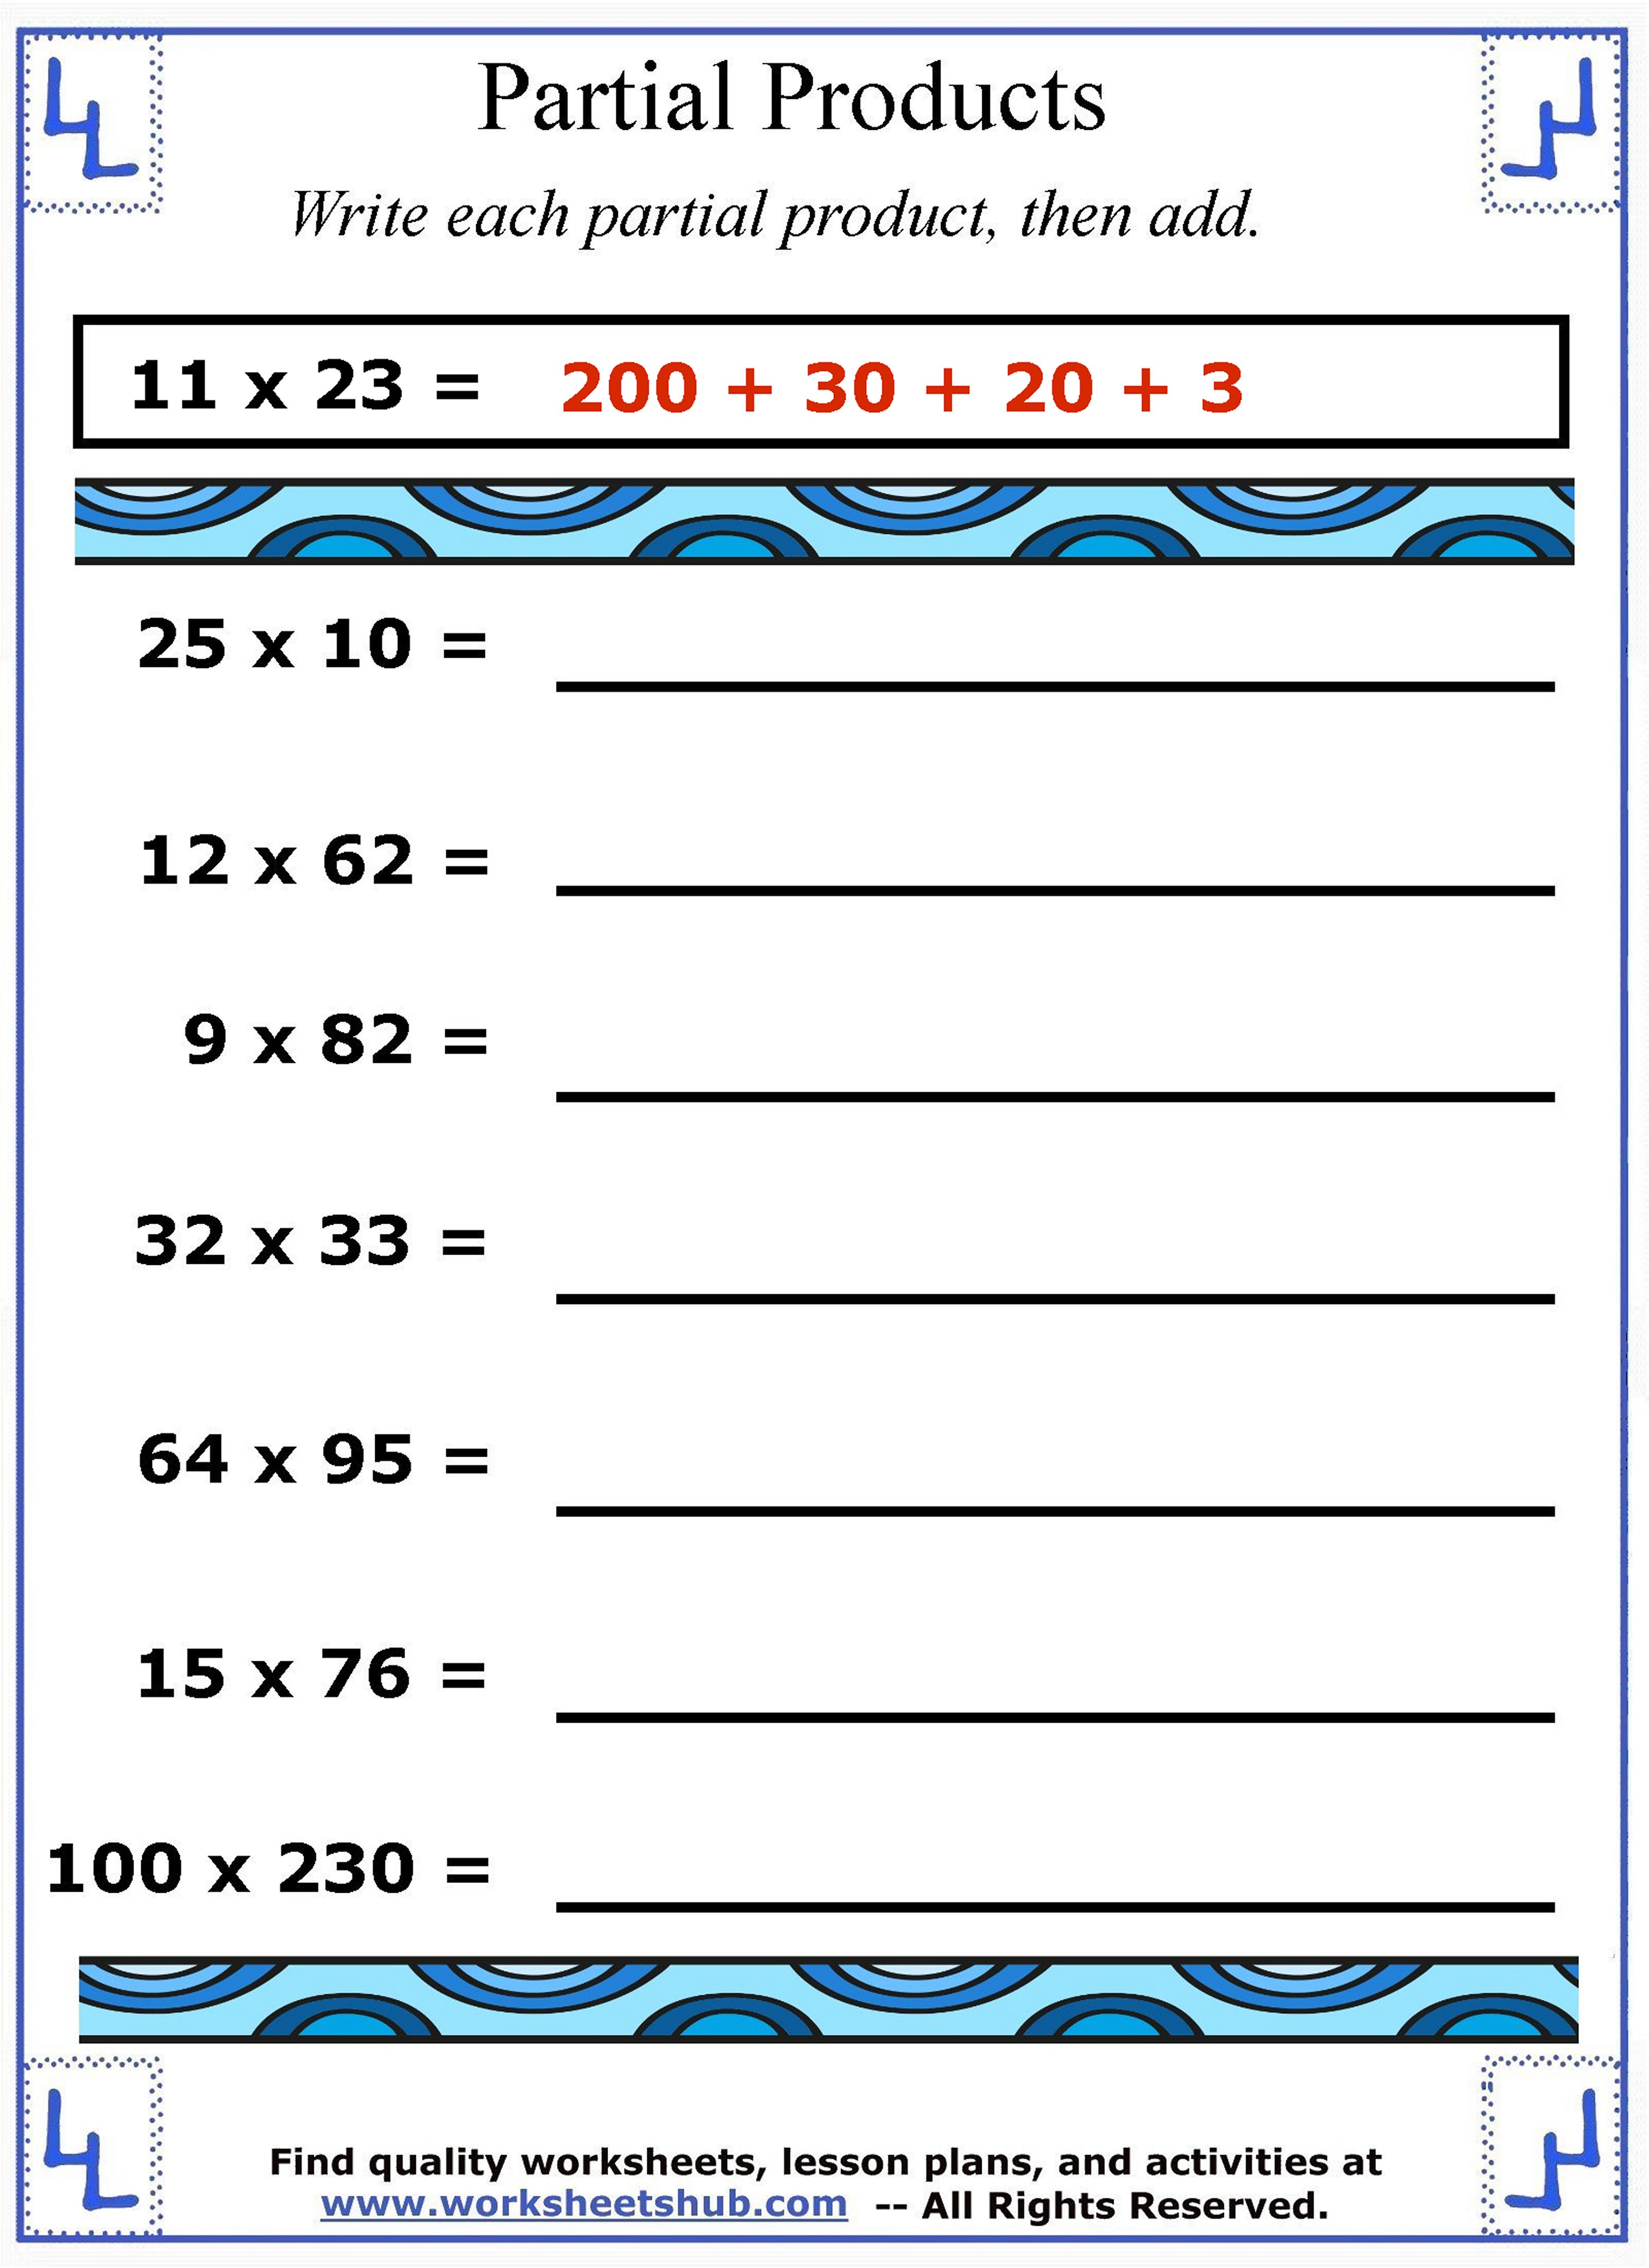 partial-products-multiplication-strategies